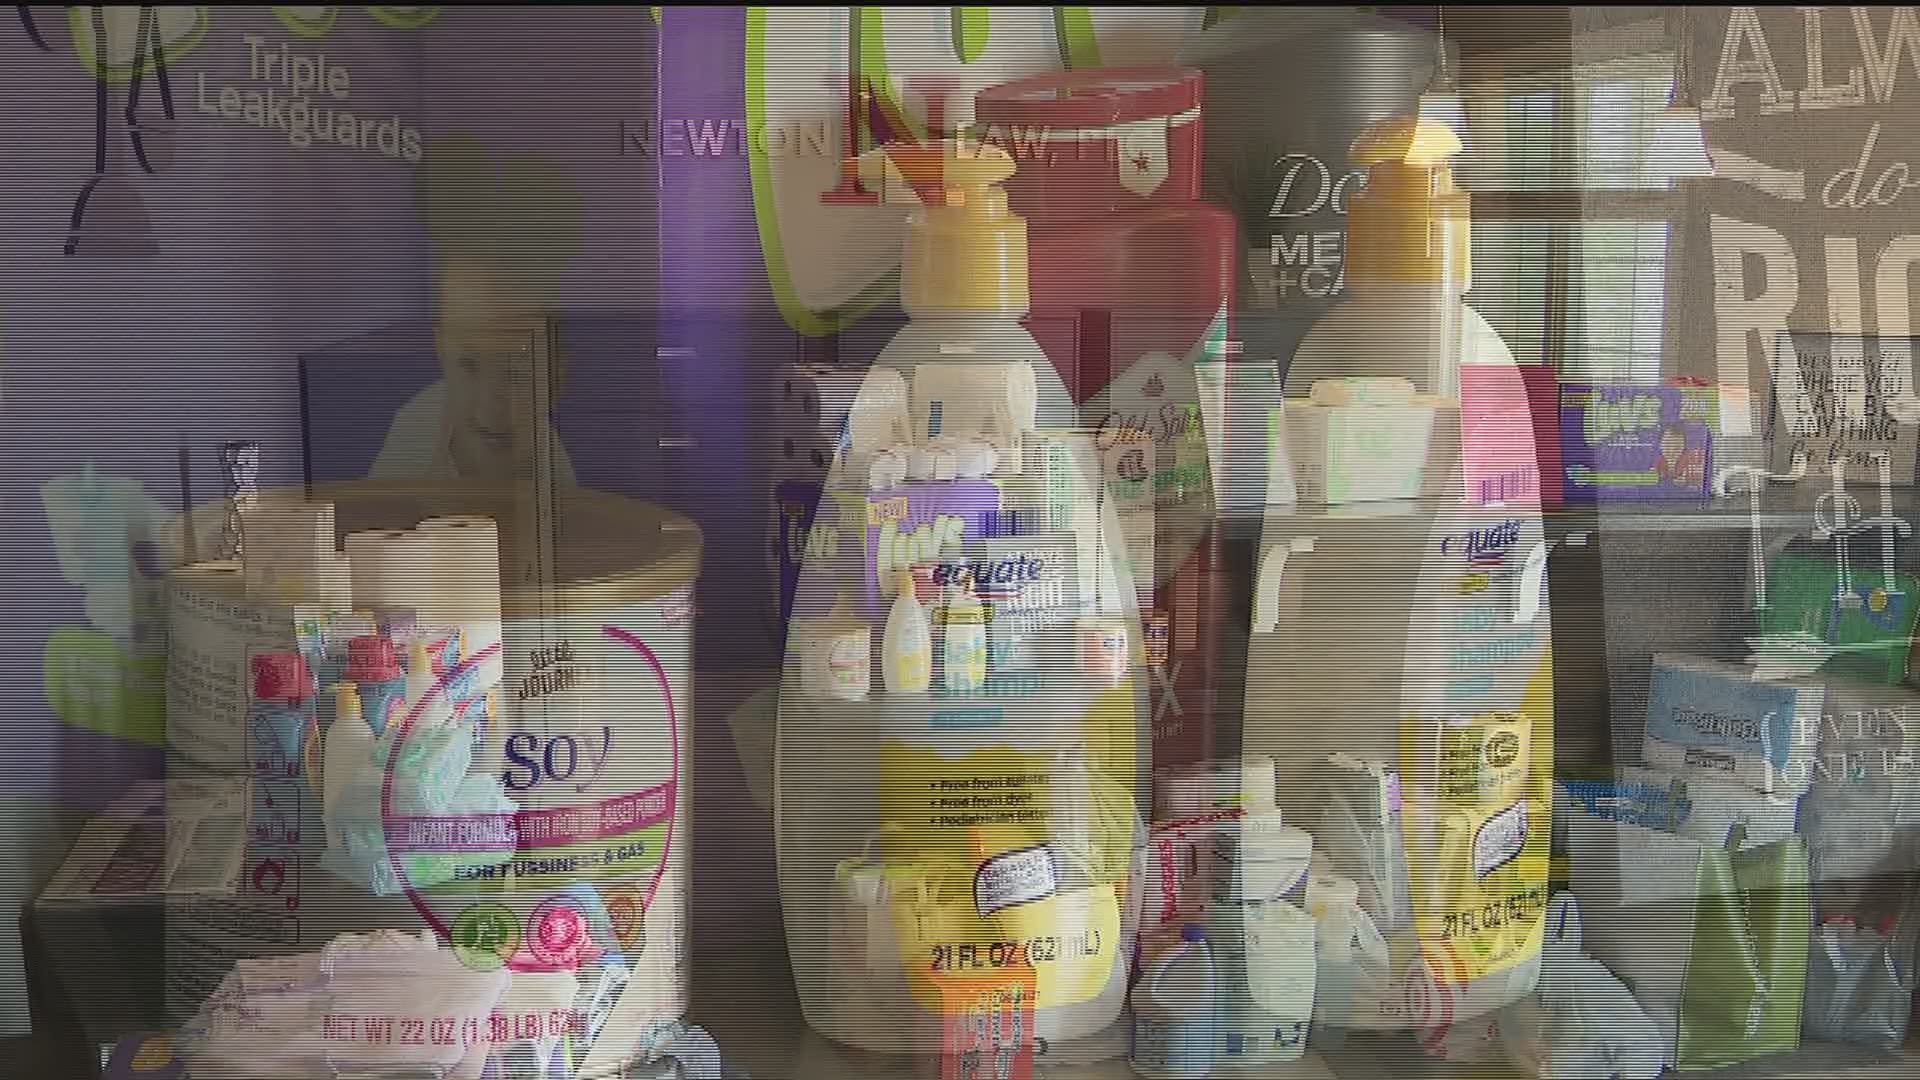 Food, hygiene products, baby supplies, cash and clothing were all part of the items donated to a Quad Cities supply drive for Cedar Rapids residents.